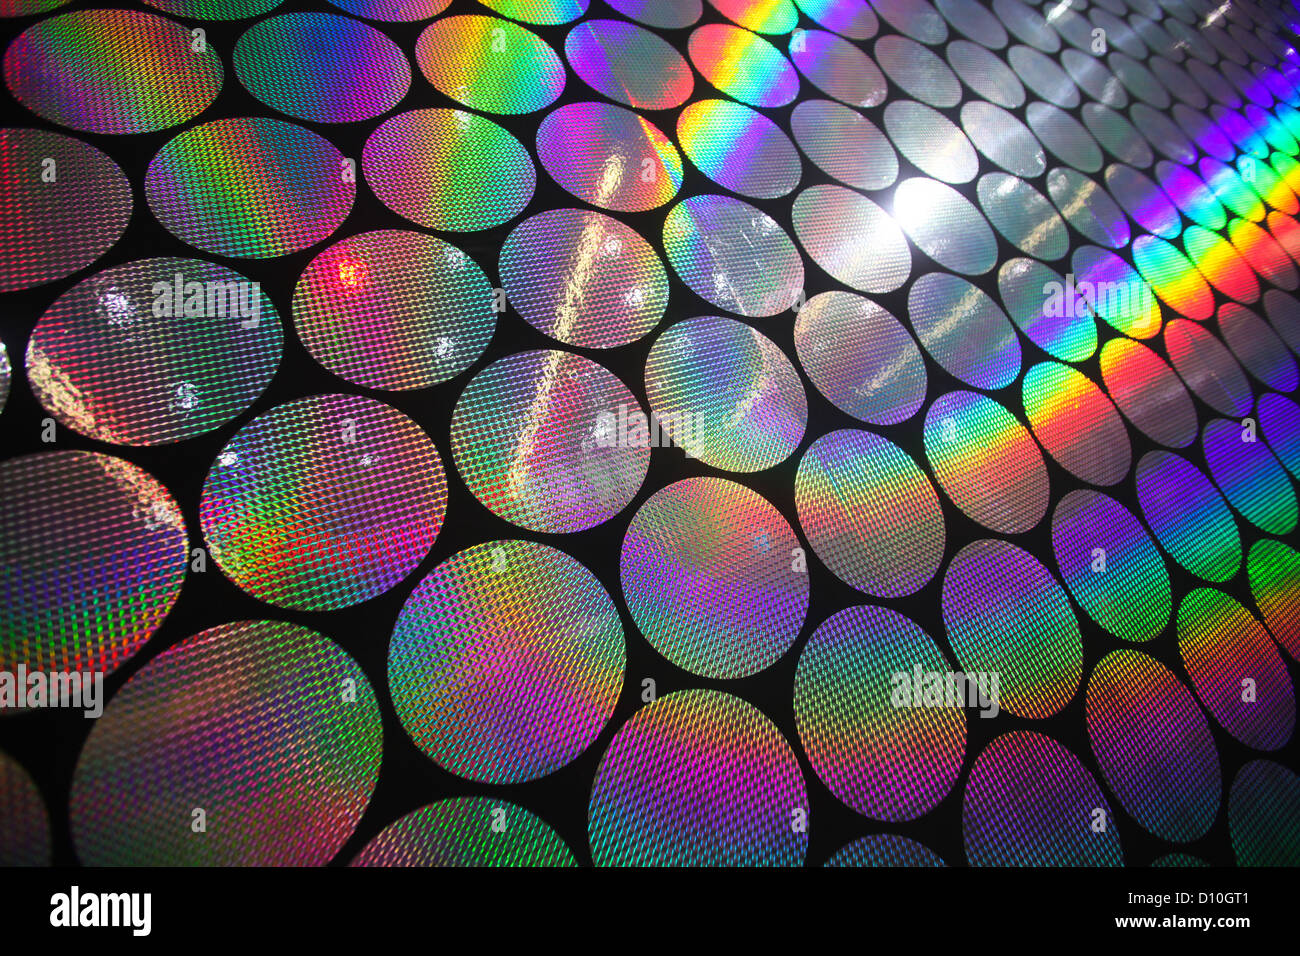 Circular holographic patterns of on background Stock Photo